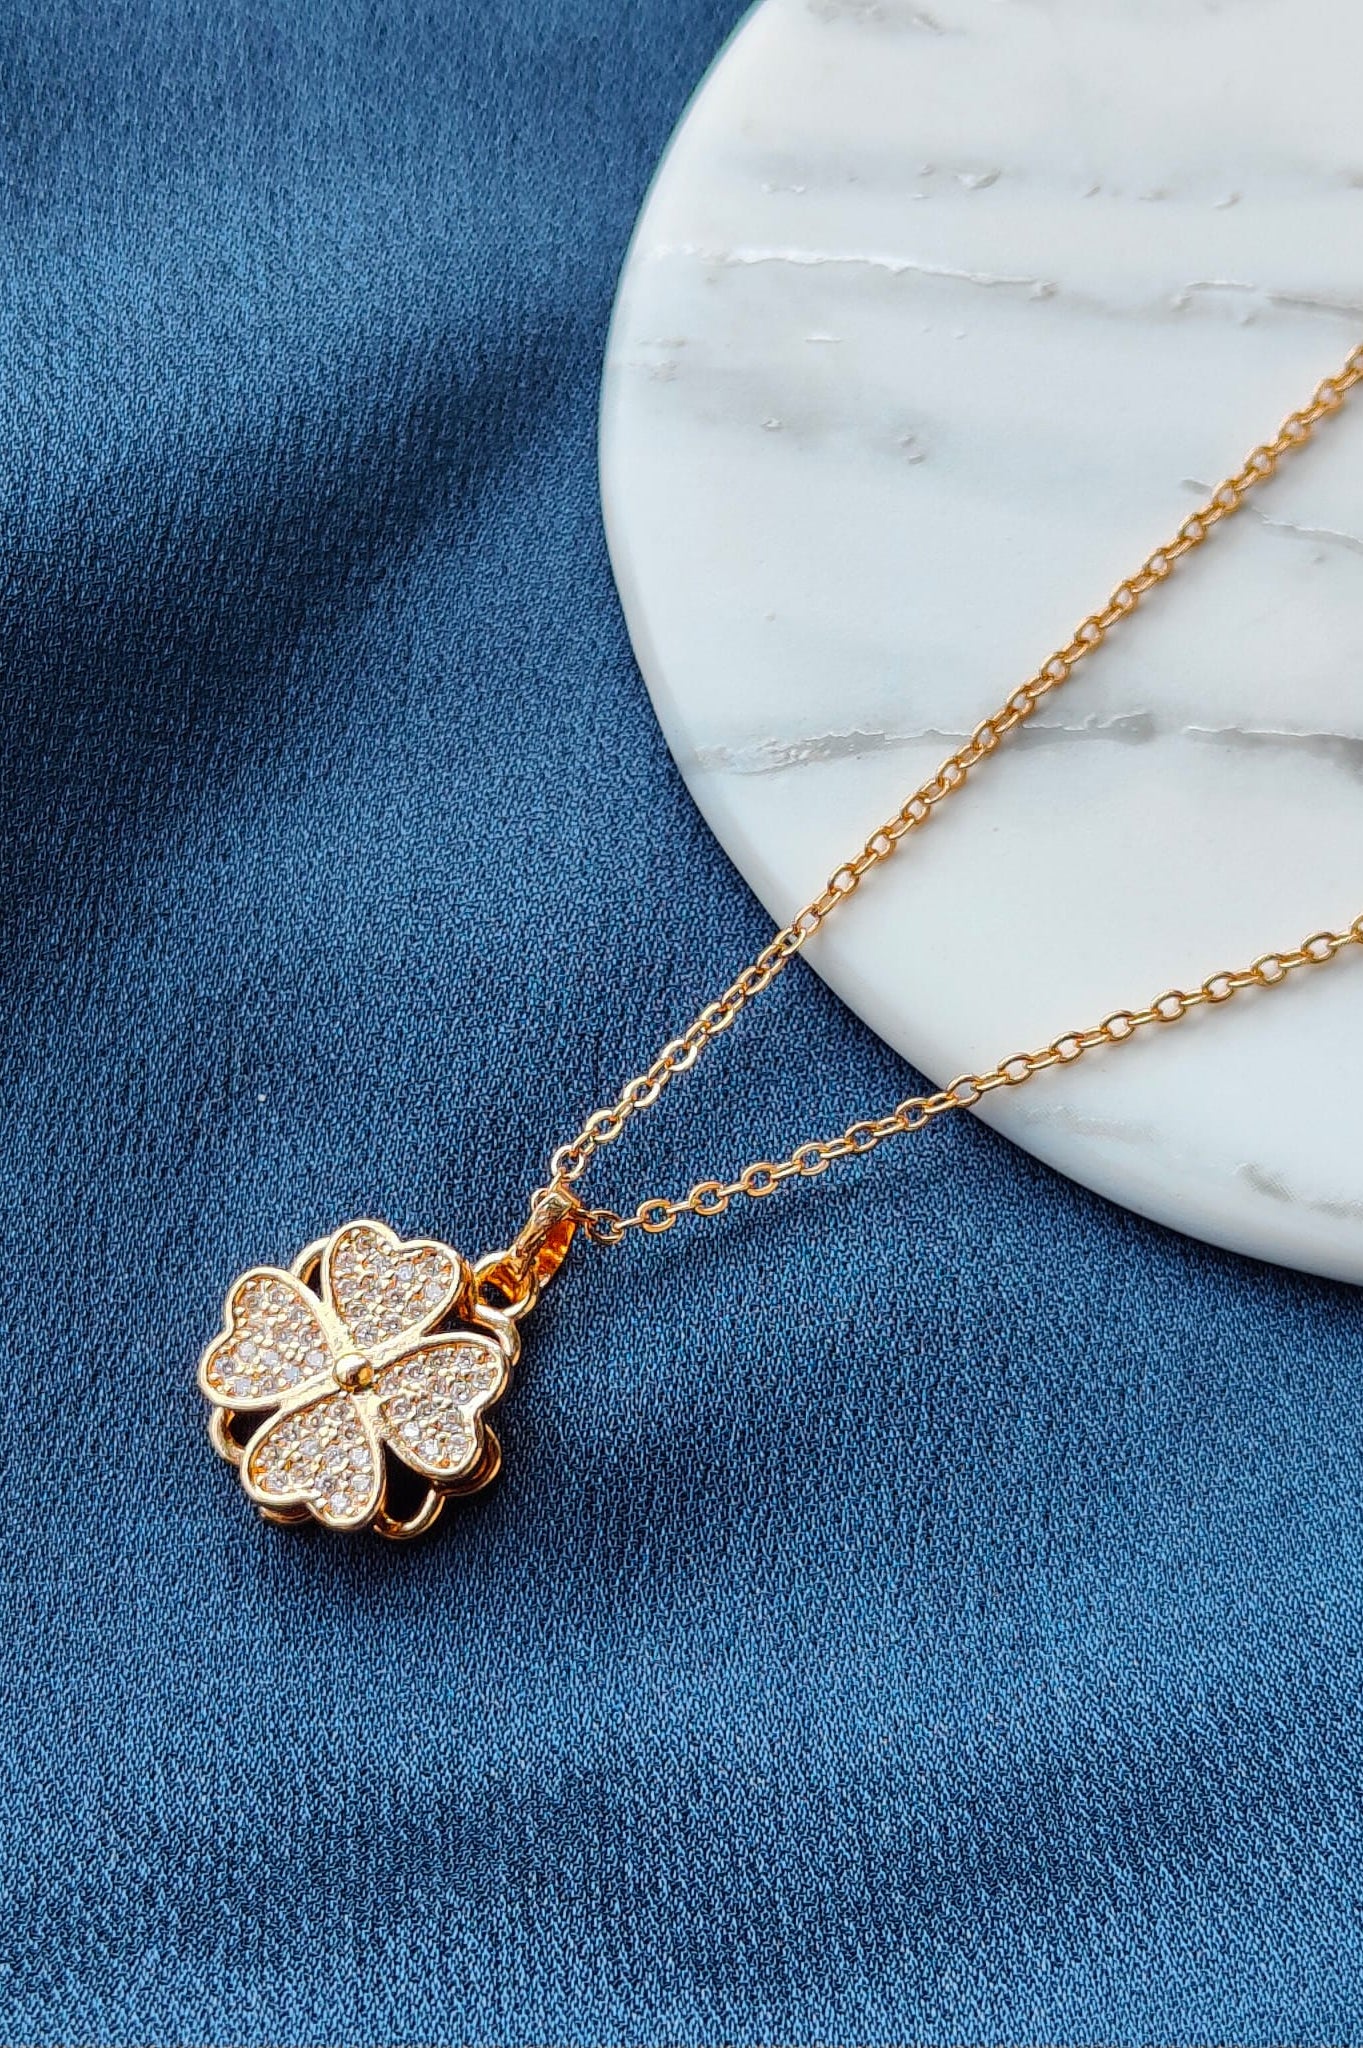 Gold Large Clover Shamrock Rotating Spinner Pendant Necklace The Colourful Aura